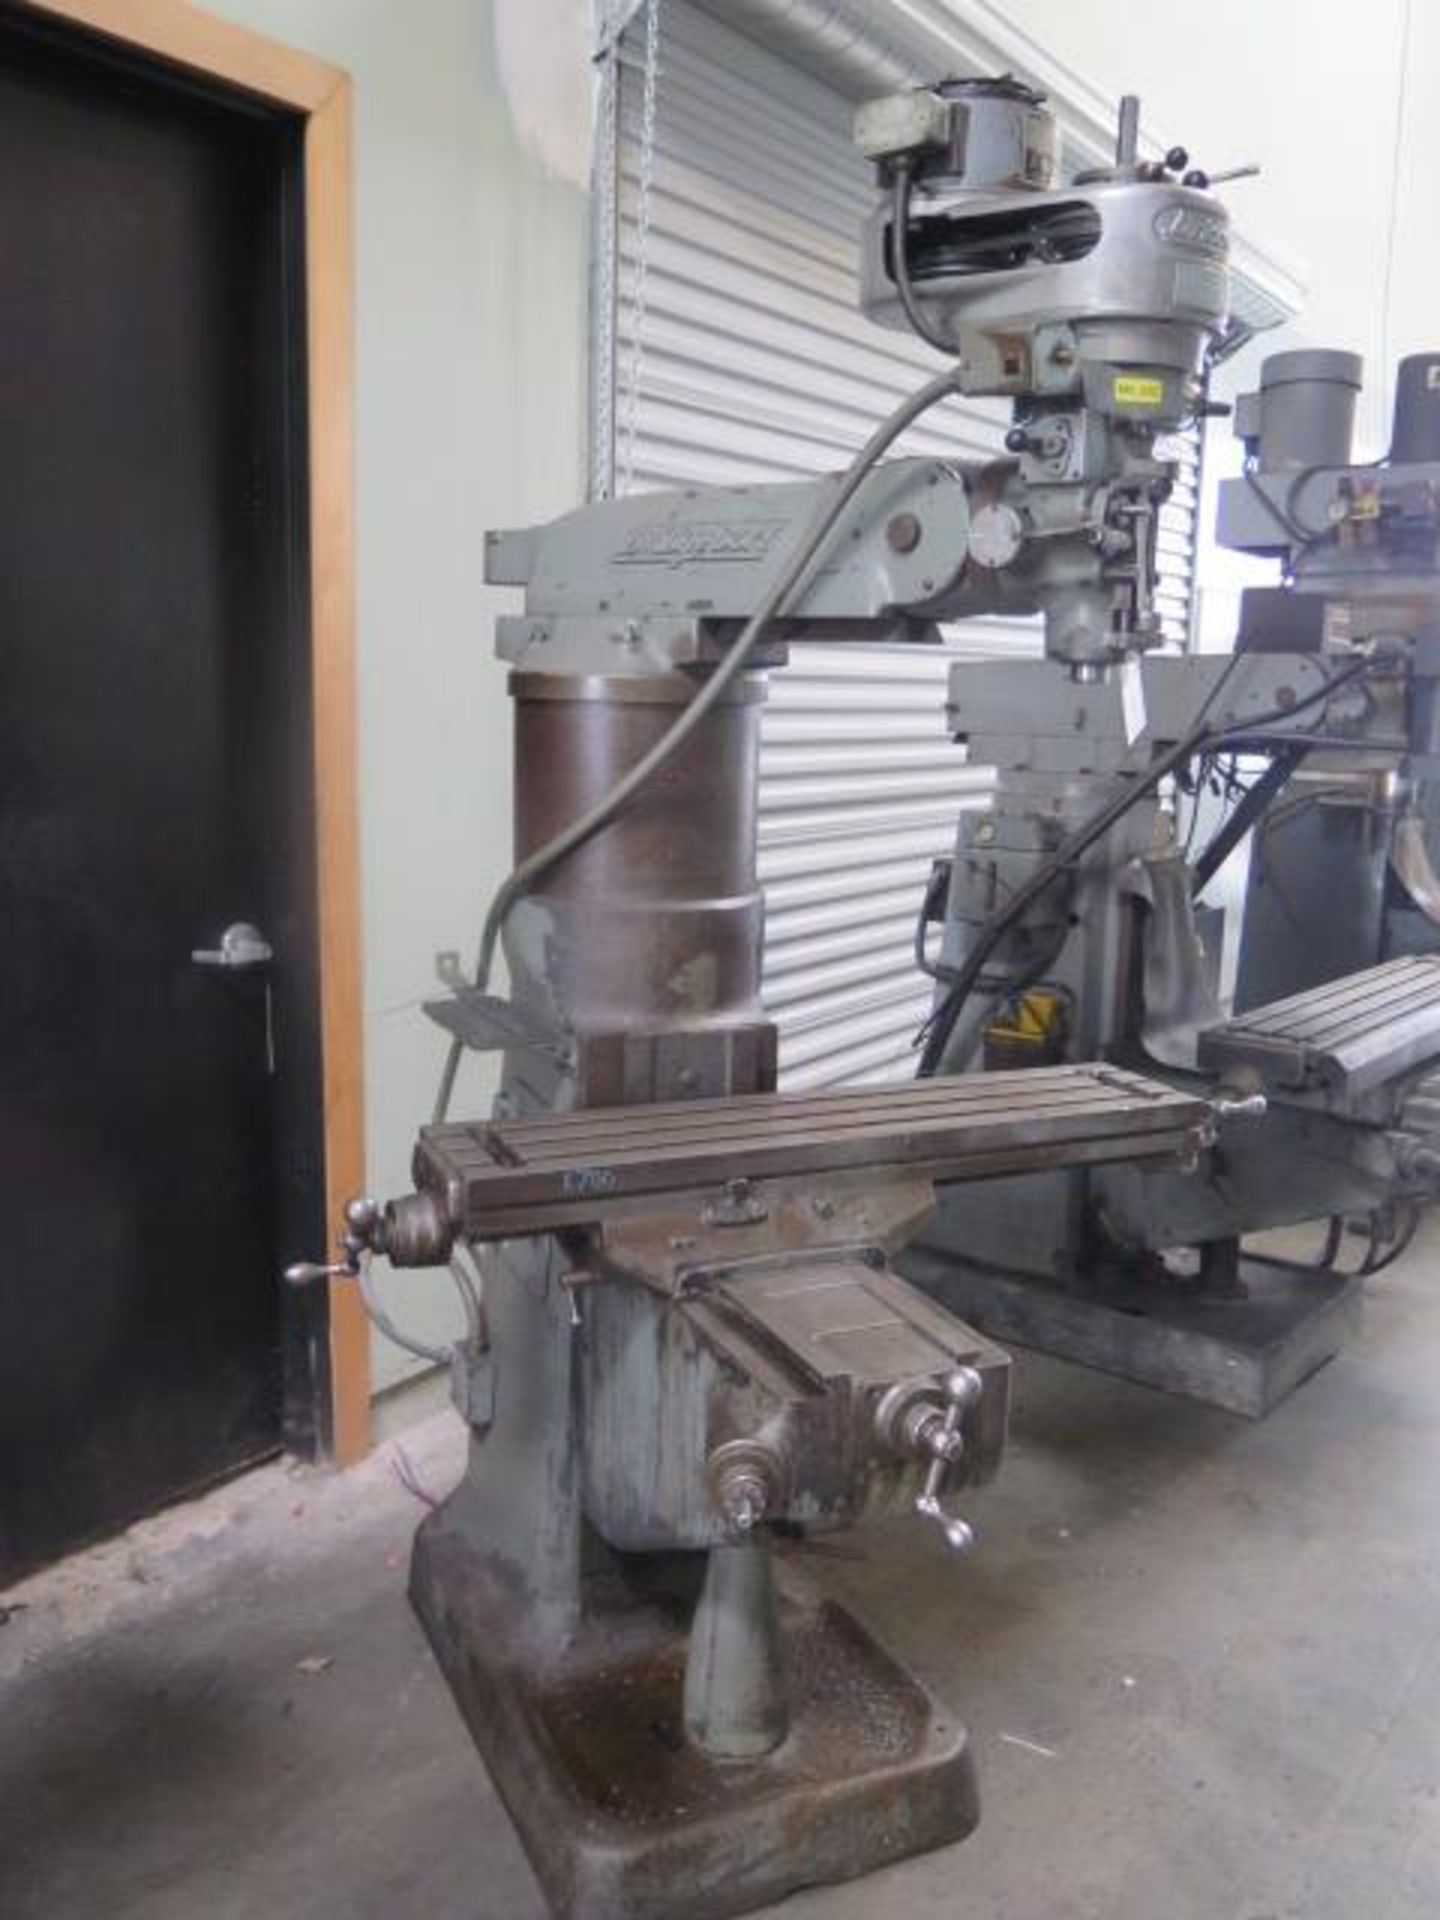 Bridgeport Vertical Mill w/ 1Hp Motor, 80-2720 RPM, 8-Speeds, 11” Riser, 9” x 42” Table SOLD AS IS - Image 3 of 11